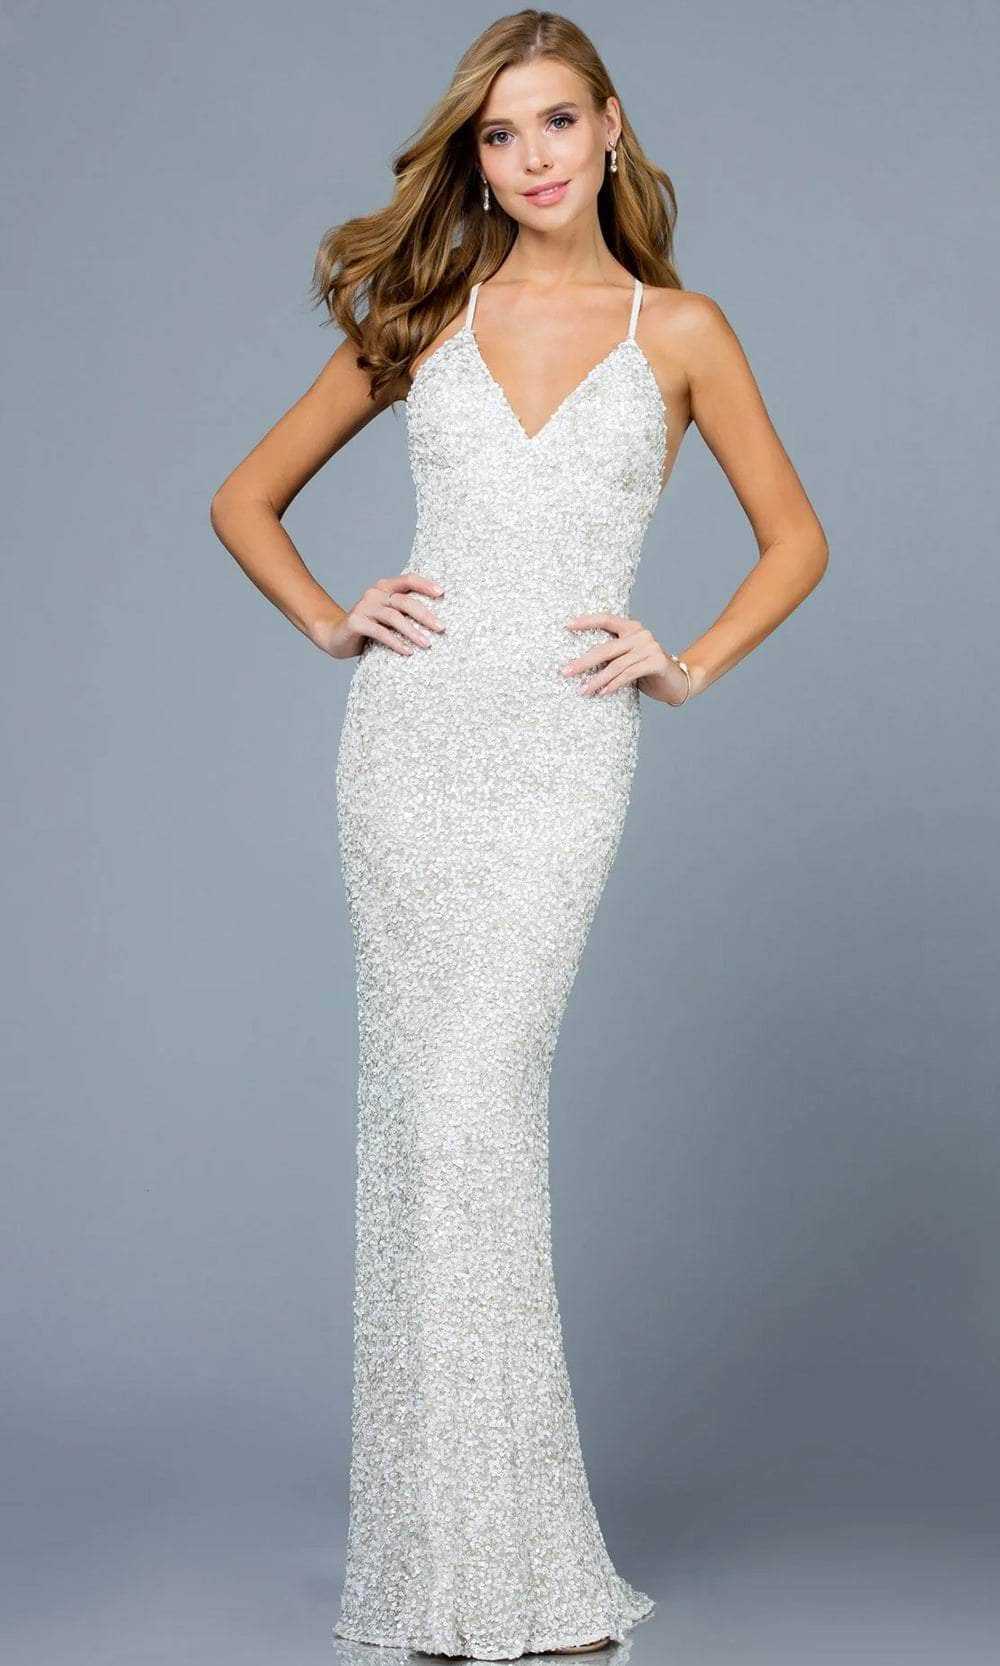 SCALA, SCALA - 47551 Full Sequins Open Back Fitted Evening Gown